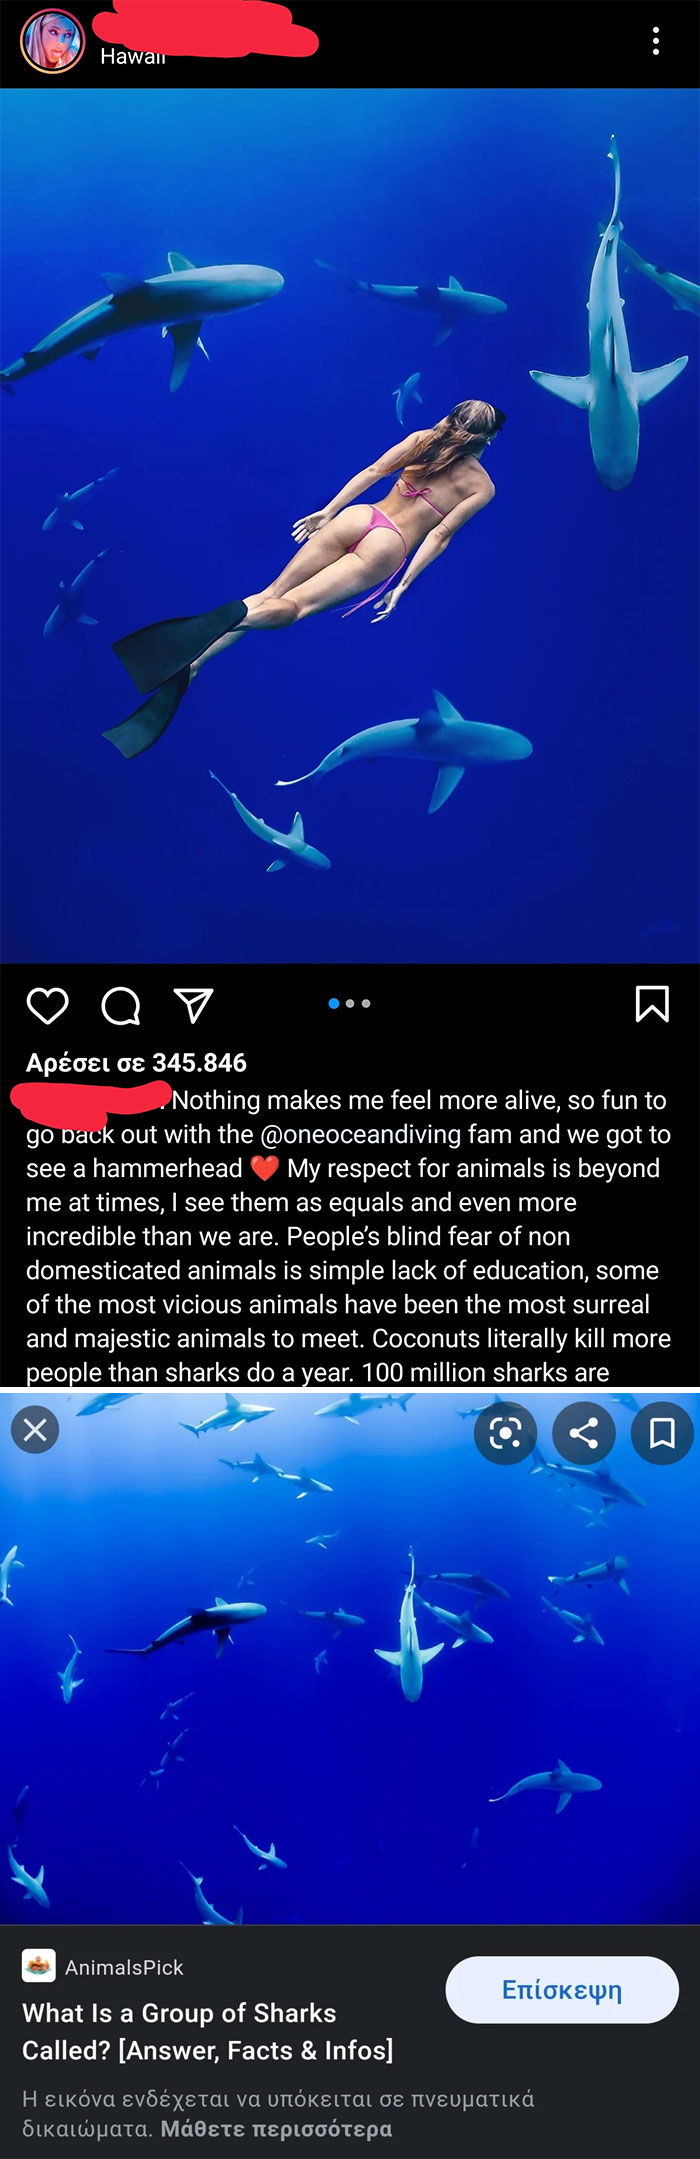 Faking Swimming With Sharks Is A Thing Now I Guess, By Blatantly Stealing A Background Image From The Internet